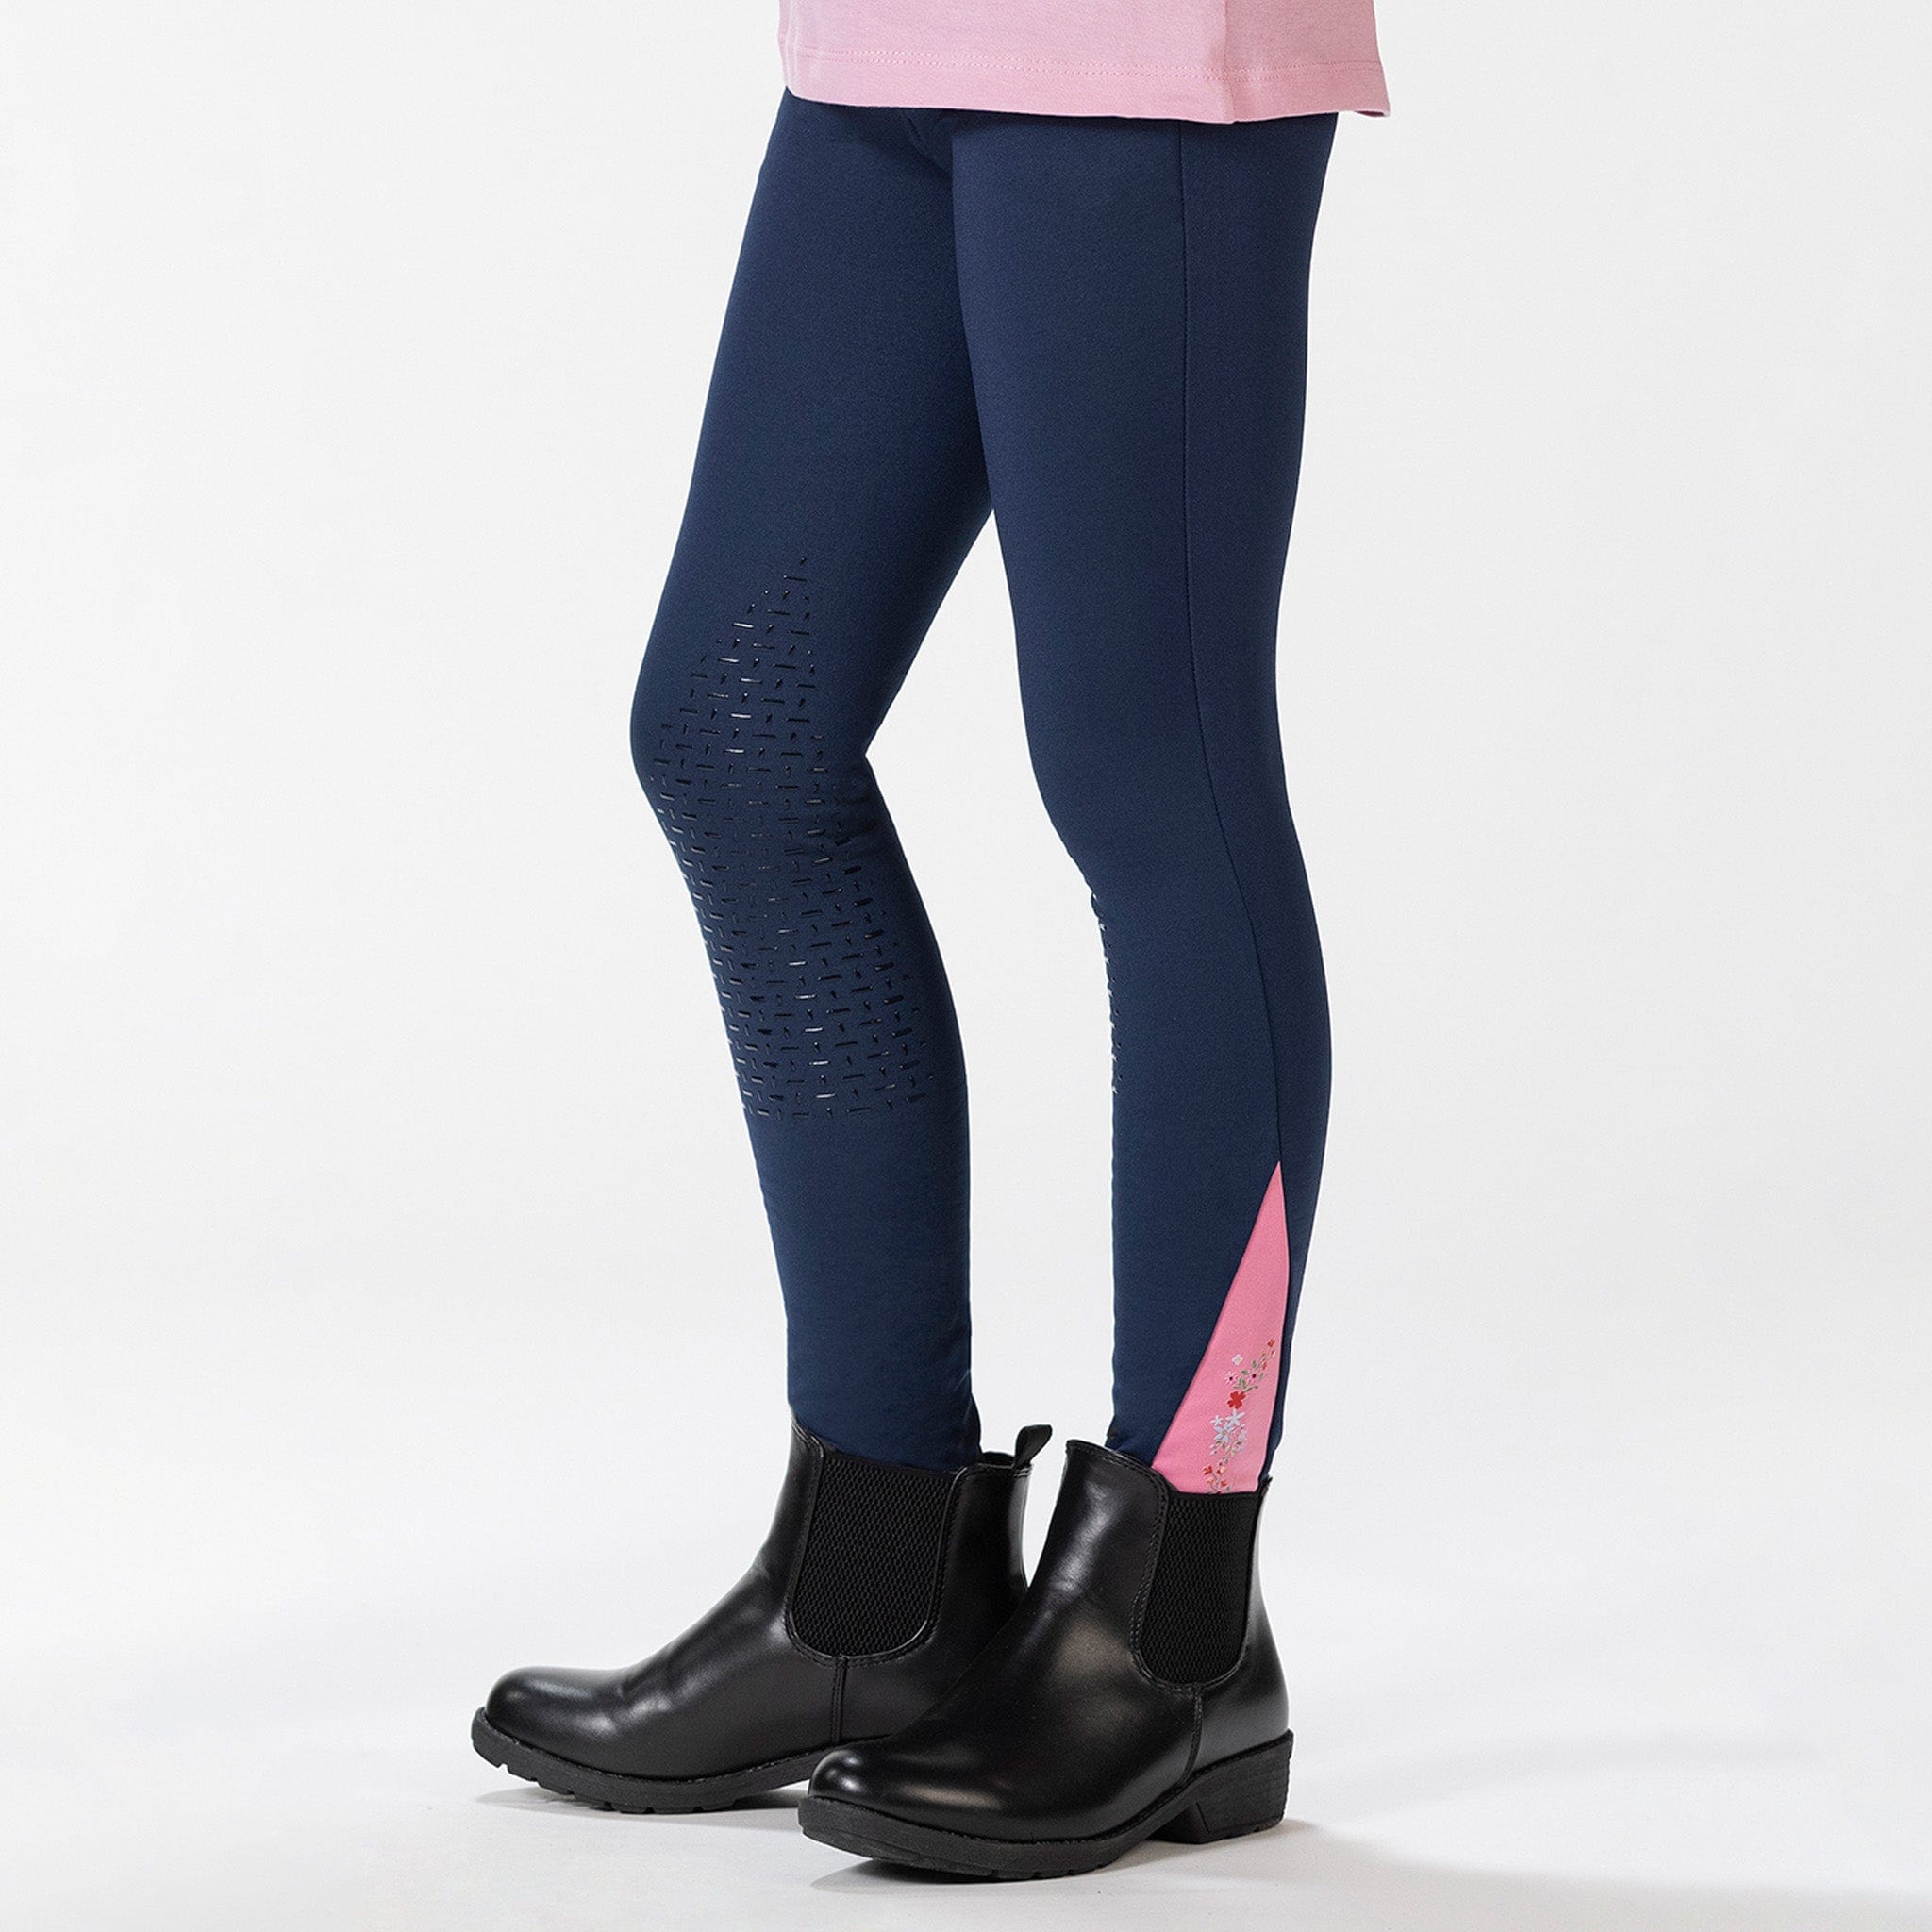 HKM Children's Horse Spirit Silicone Knee Patch Breeches 13277 Navy On Model